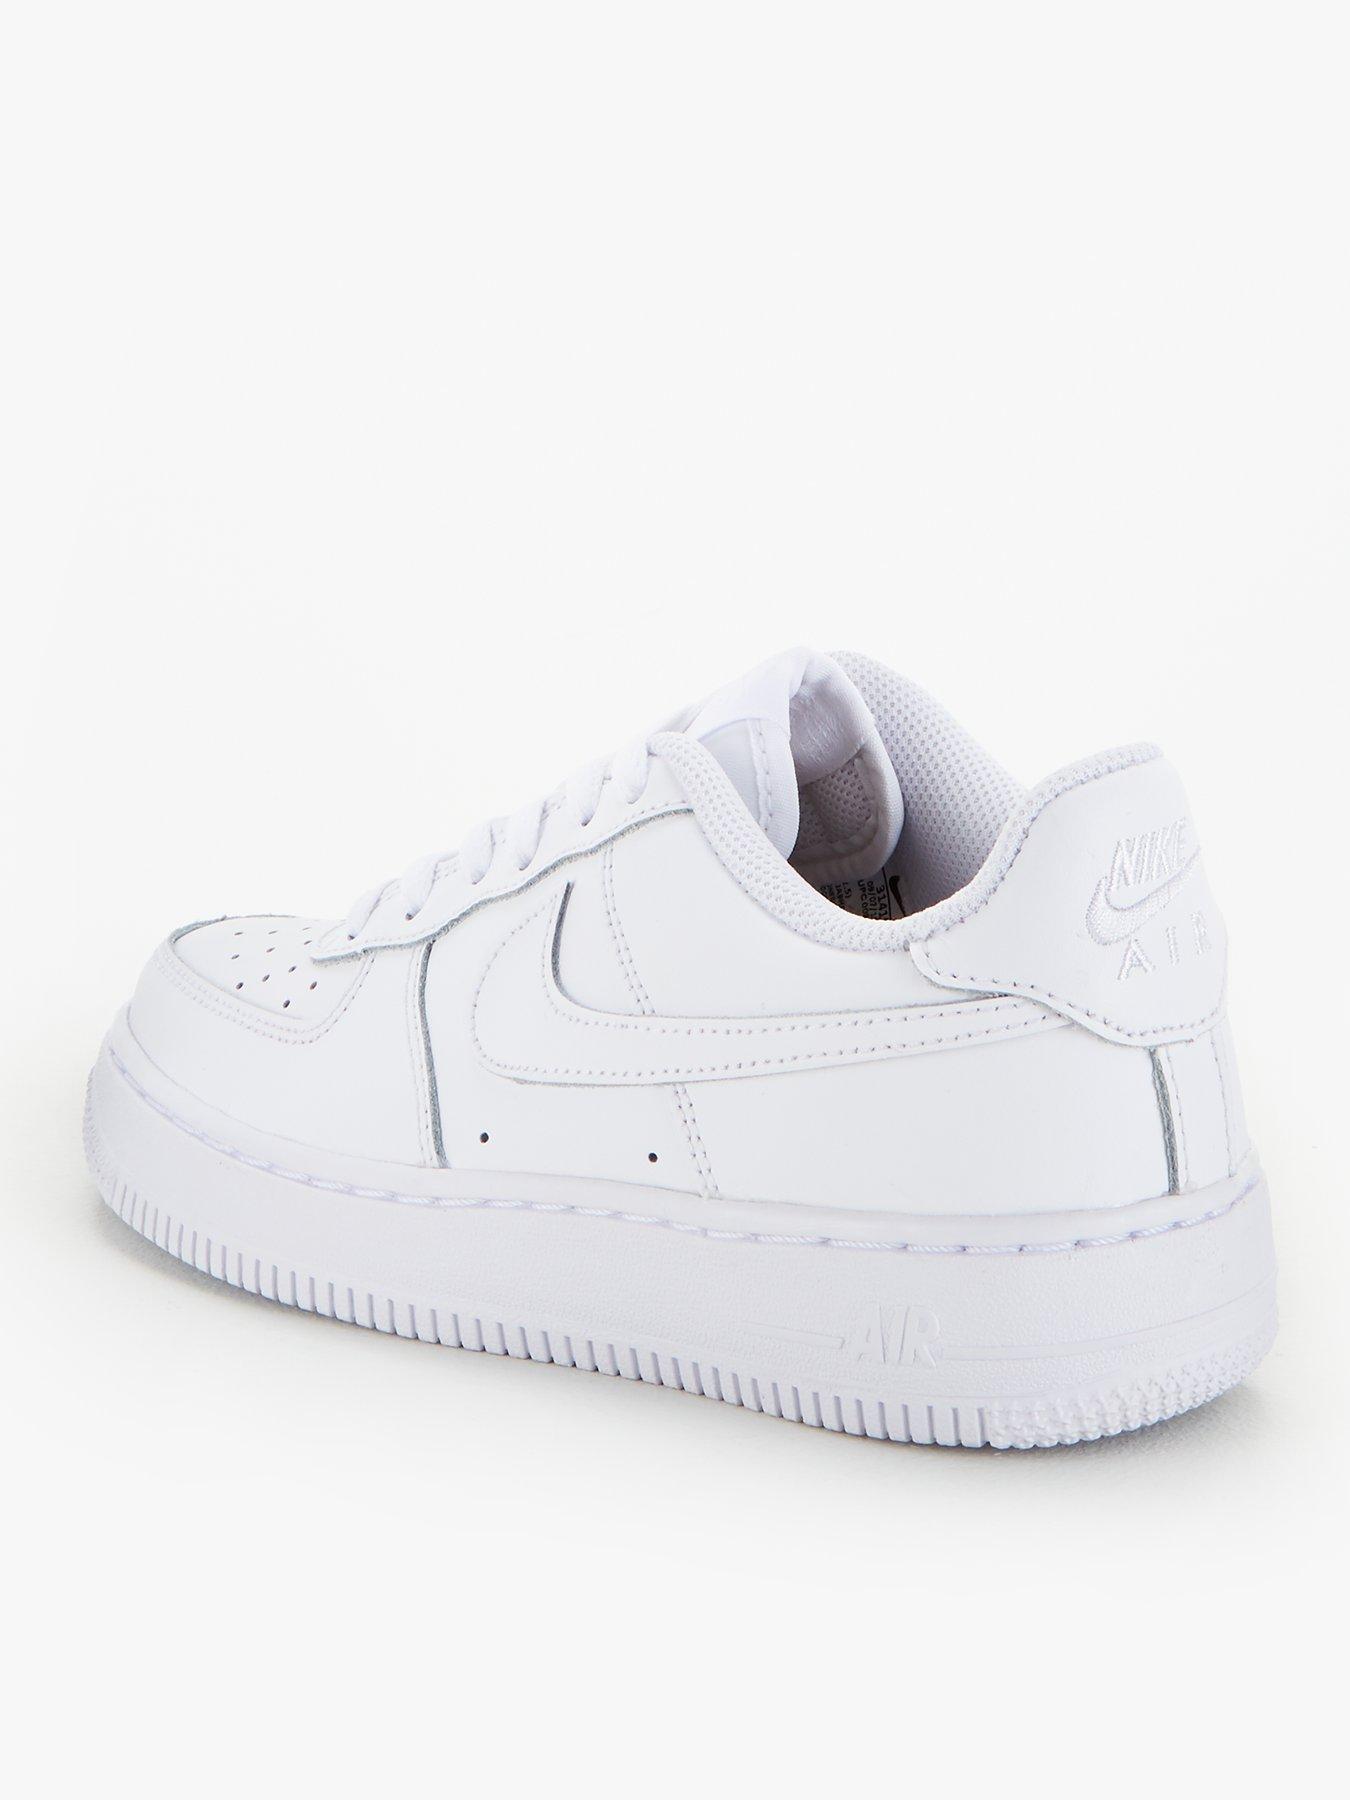 air force one junior size 4